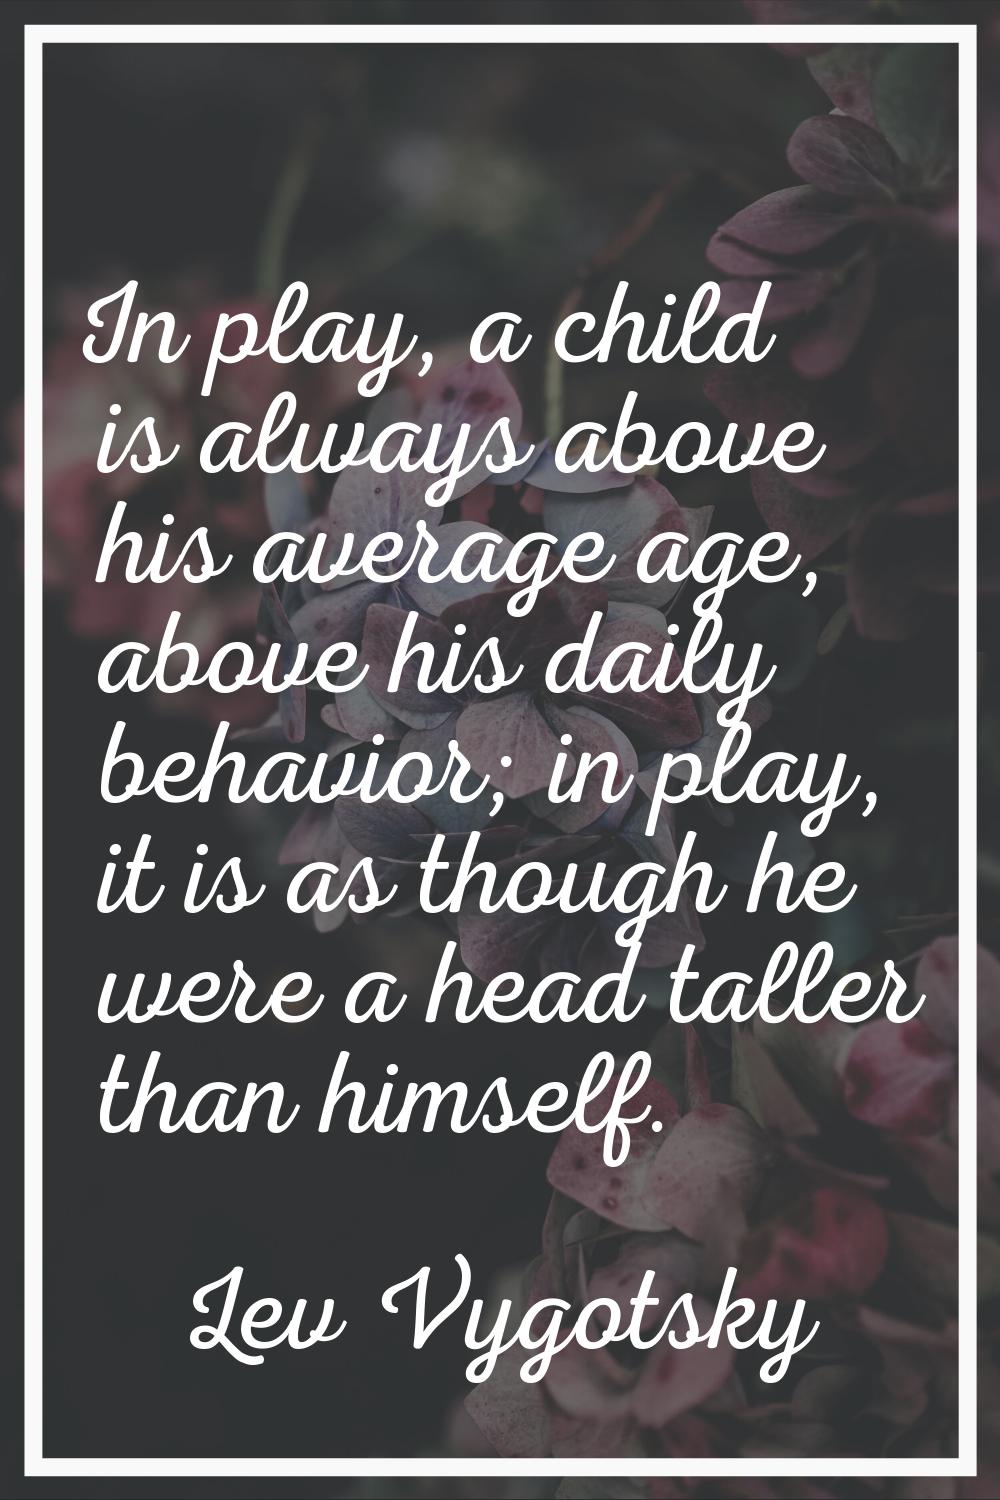 In play, a child is always above his average age, above his daily behavior; in play, it is as thoug